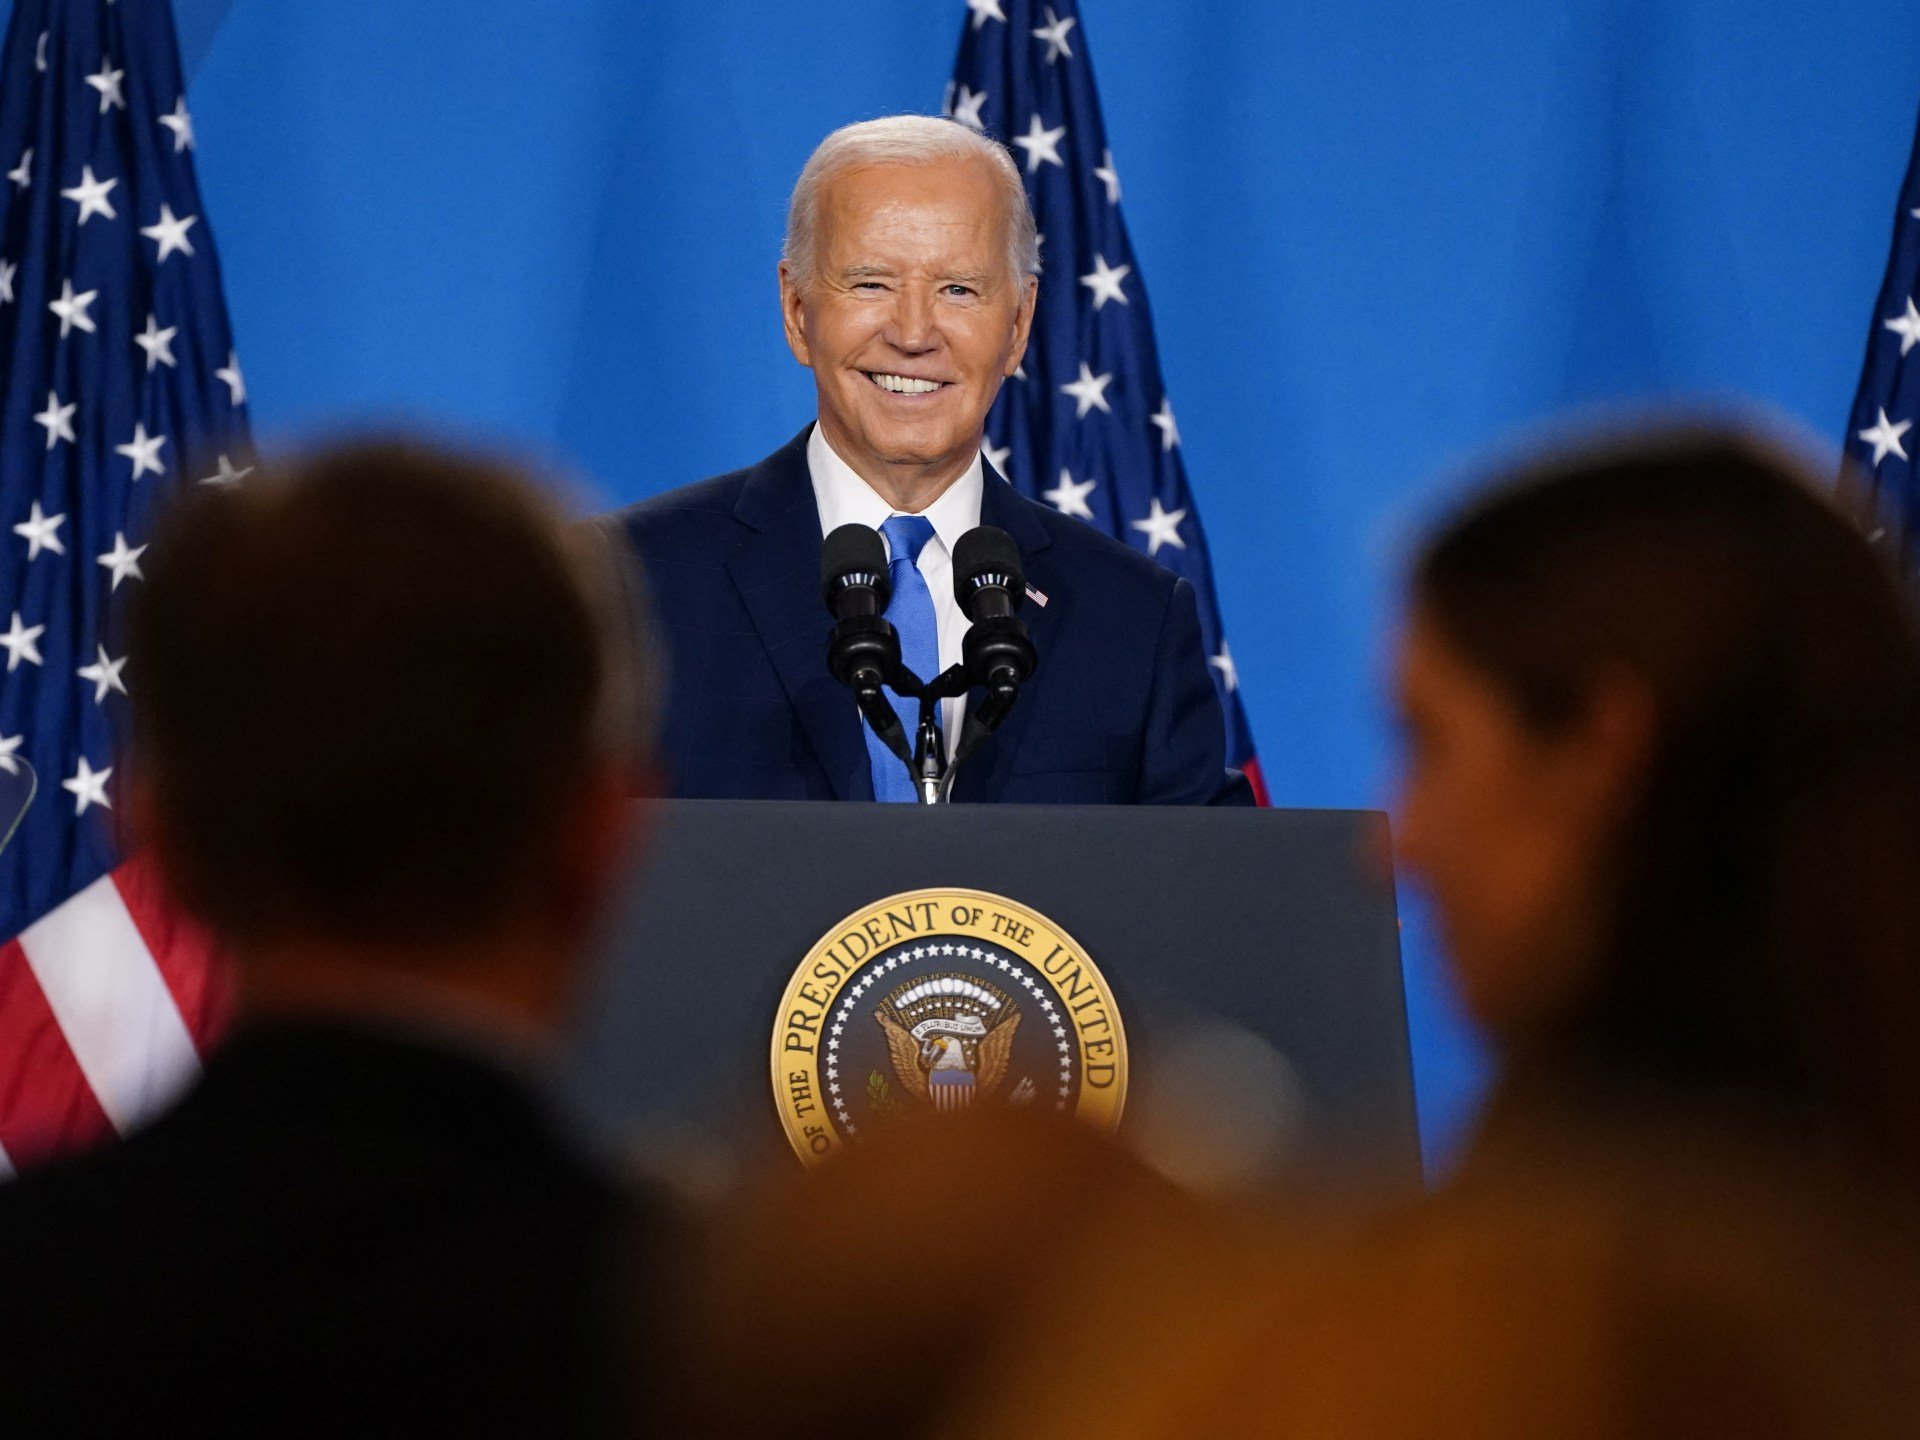 Mistakes and defiance from Biden at NATO news conference